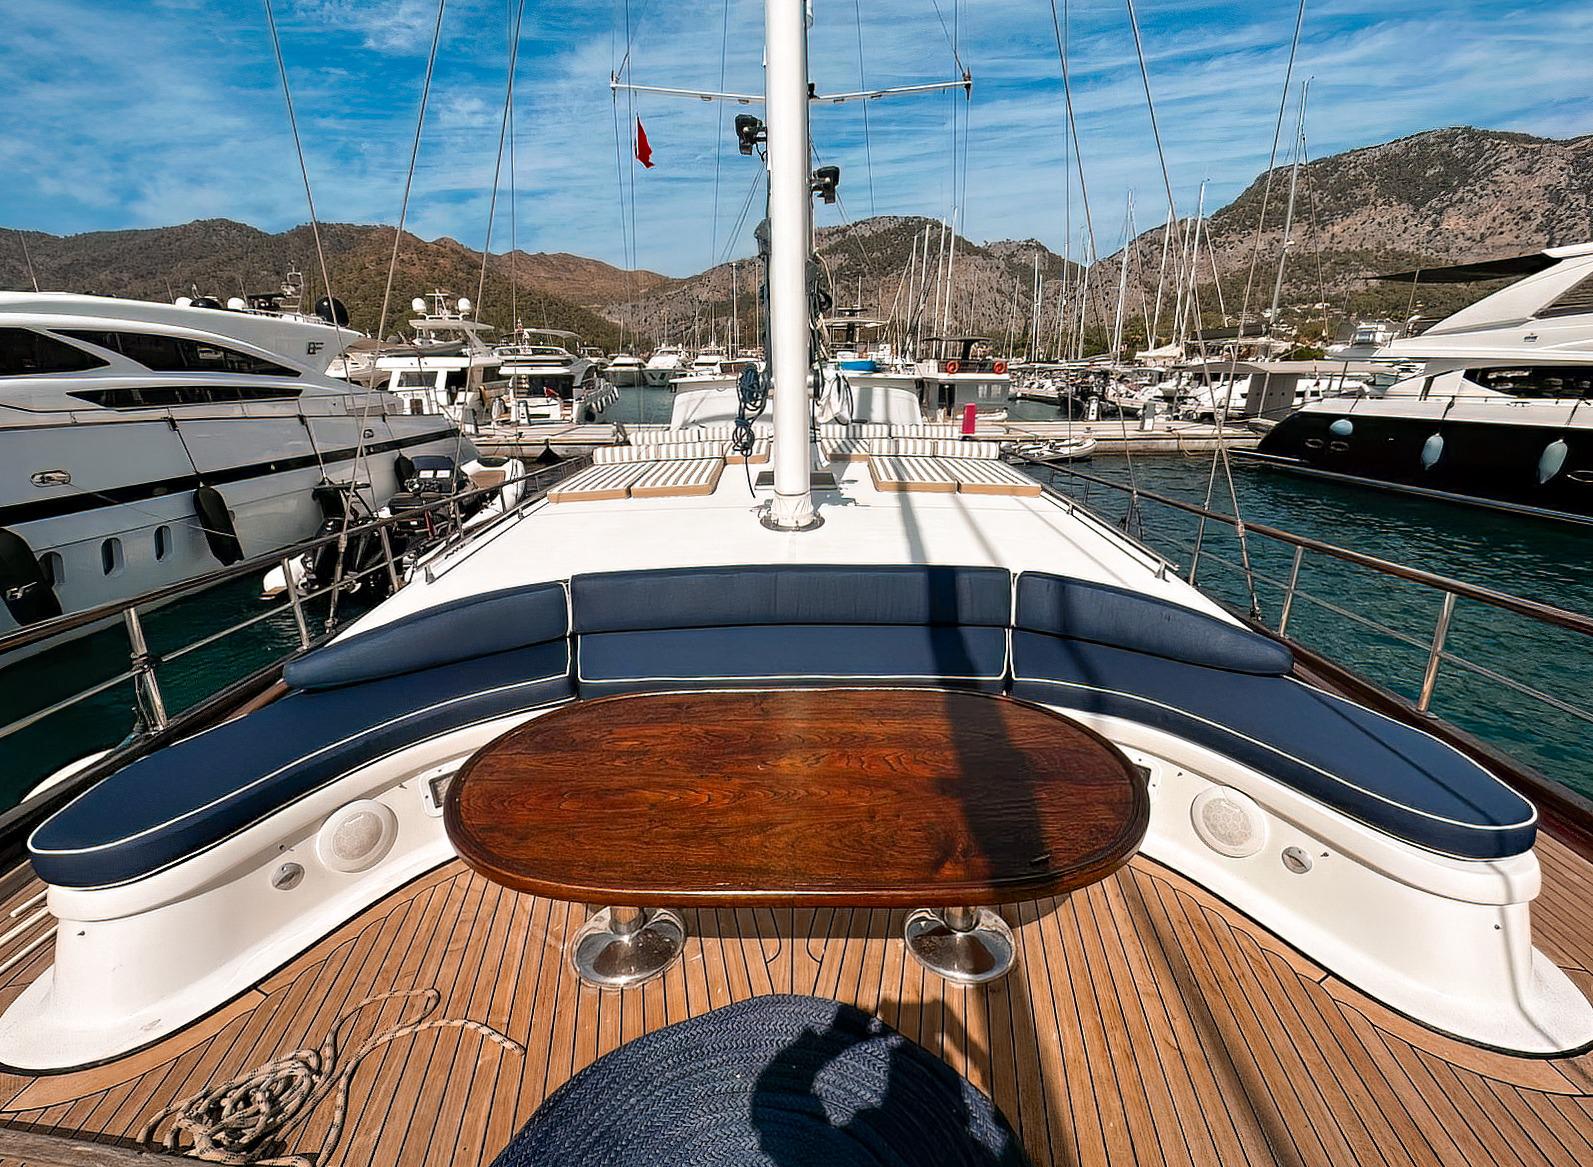 Special Edition 2007 Model: Yacht, Refitted 2023, 27m, 4 Cabins, €1.39M